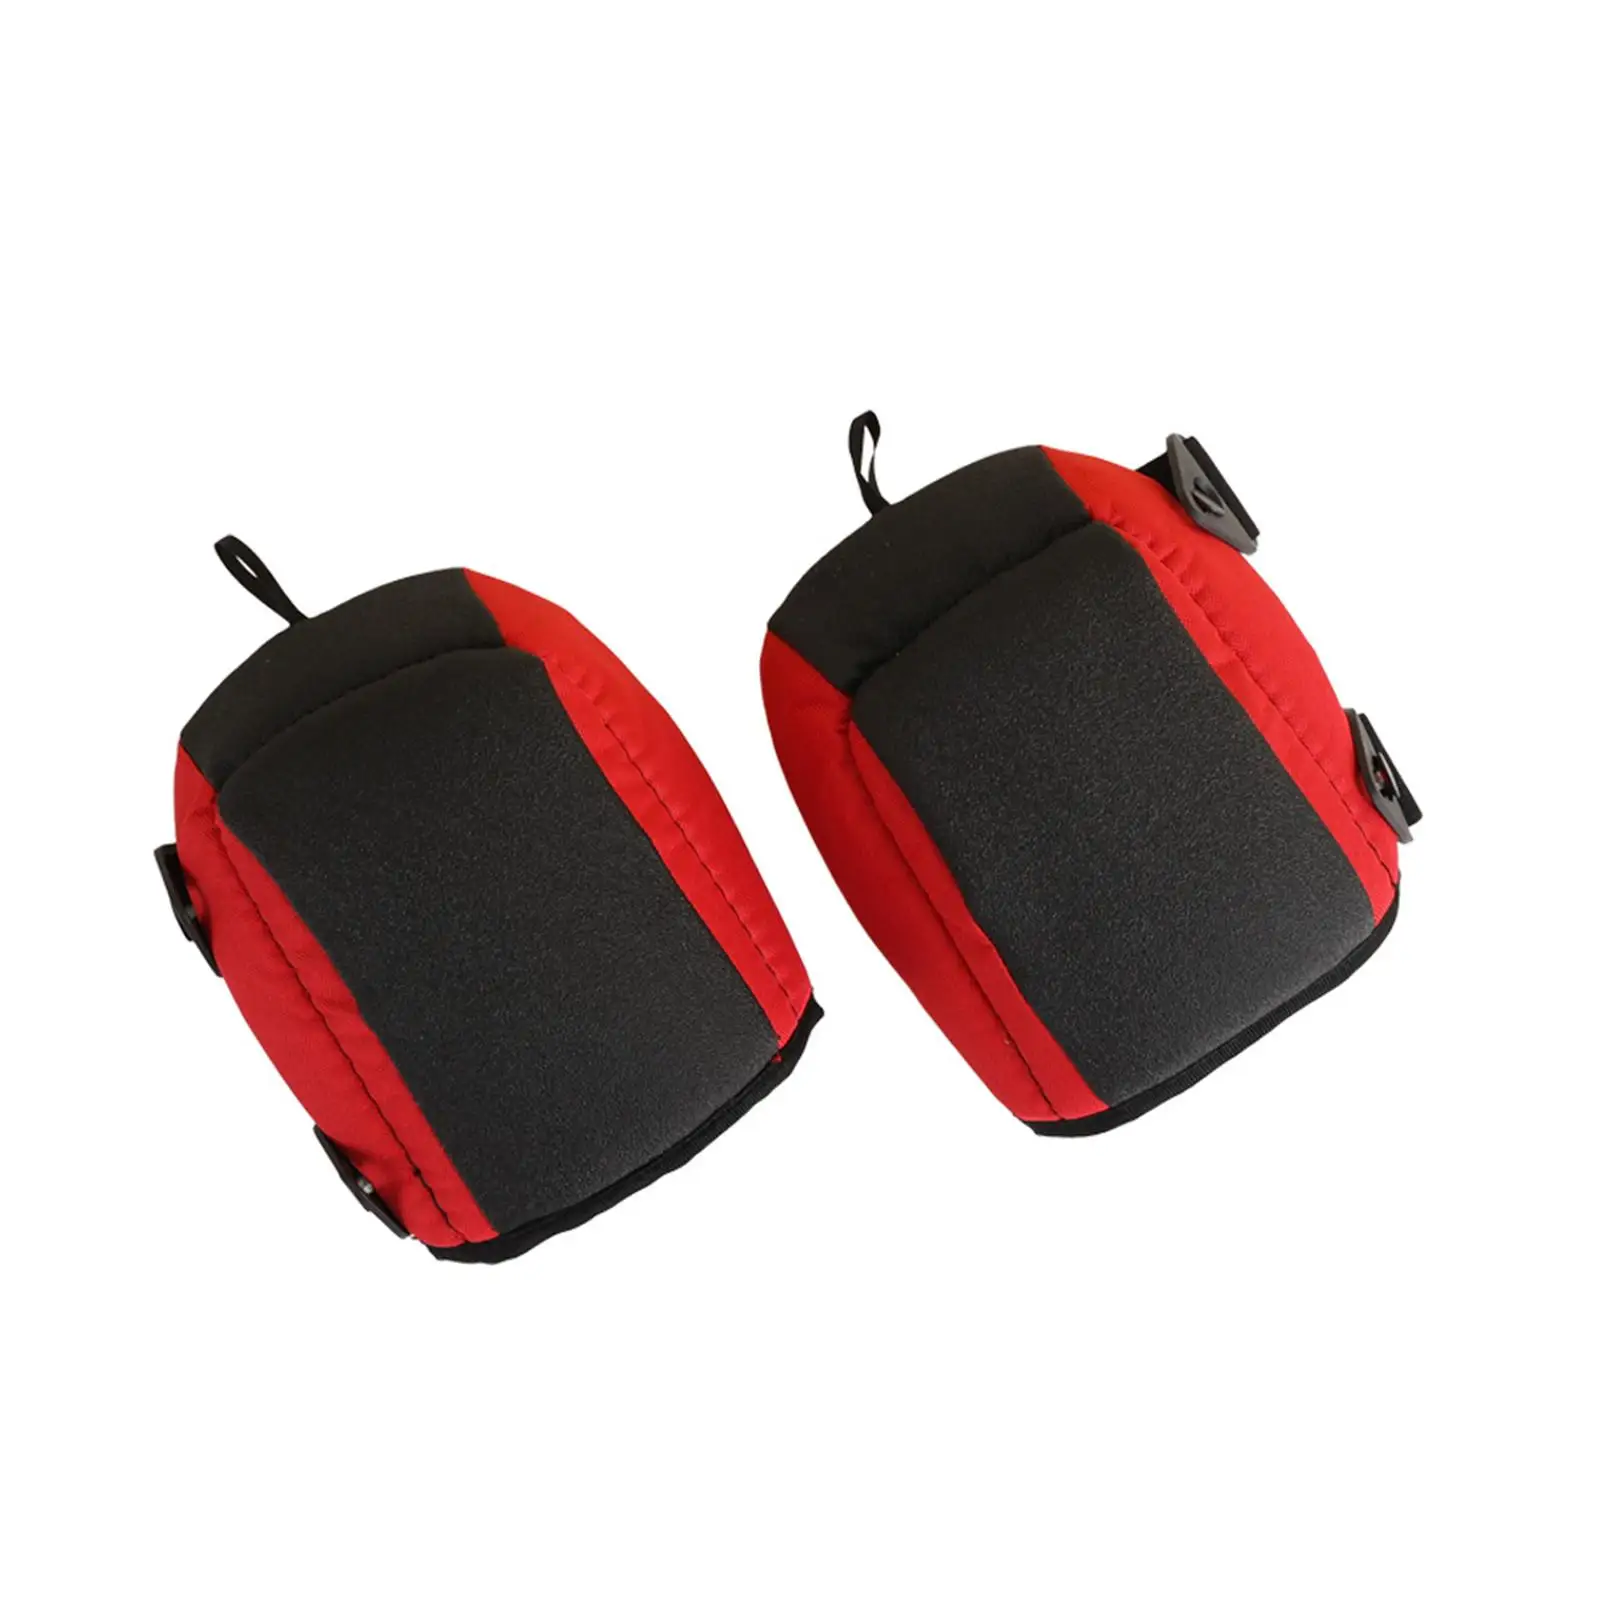 2 Pieces Knee Pads for Work Hunting Foam Padding Adjustable Straps Safety Protective Gear Set Heavy Duty Foam Knee Pads